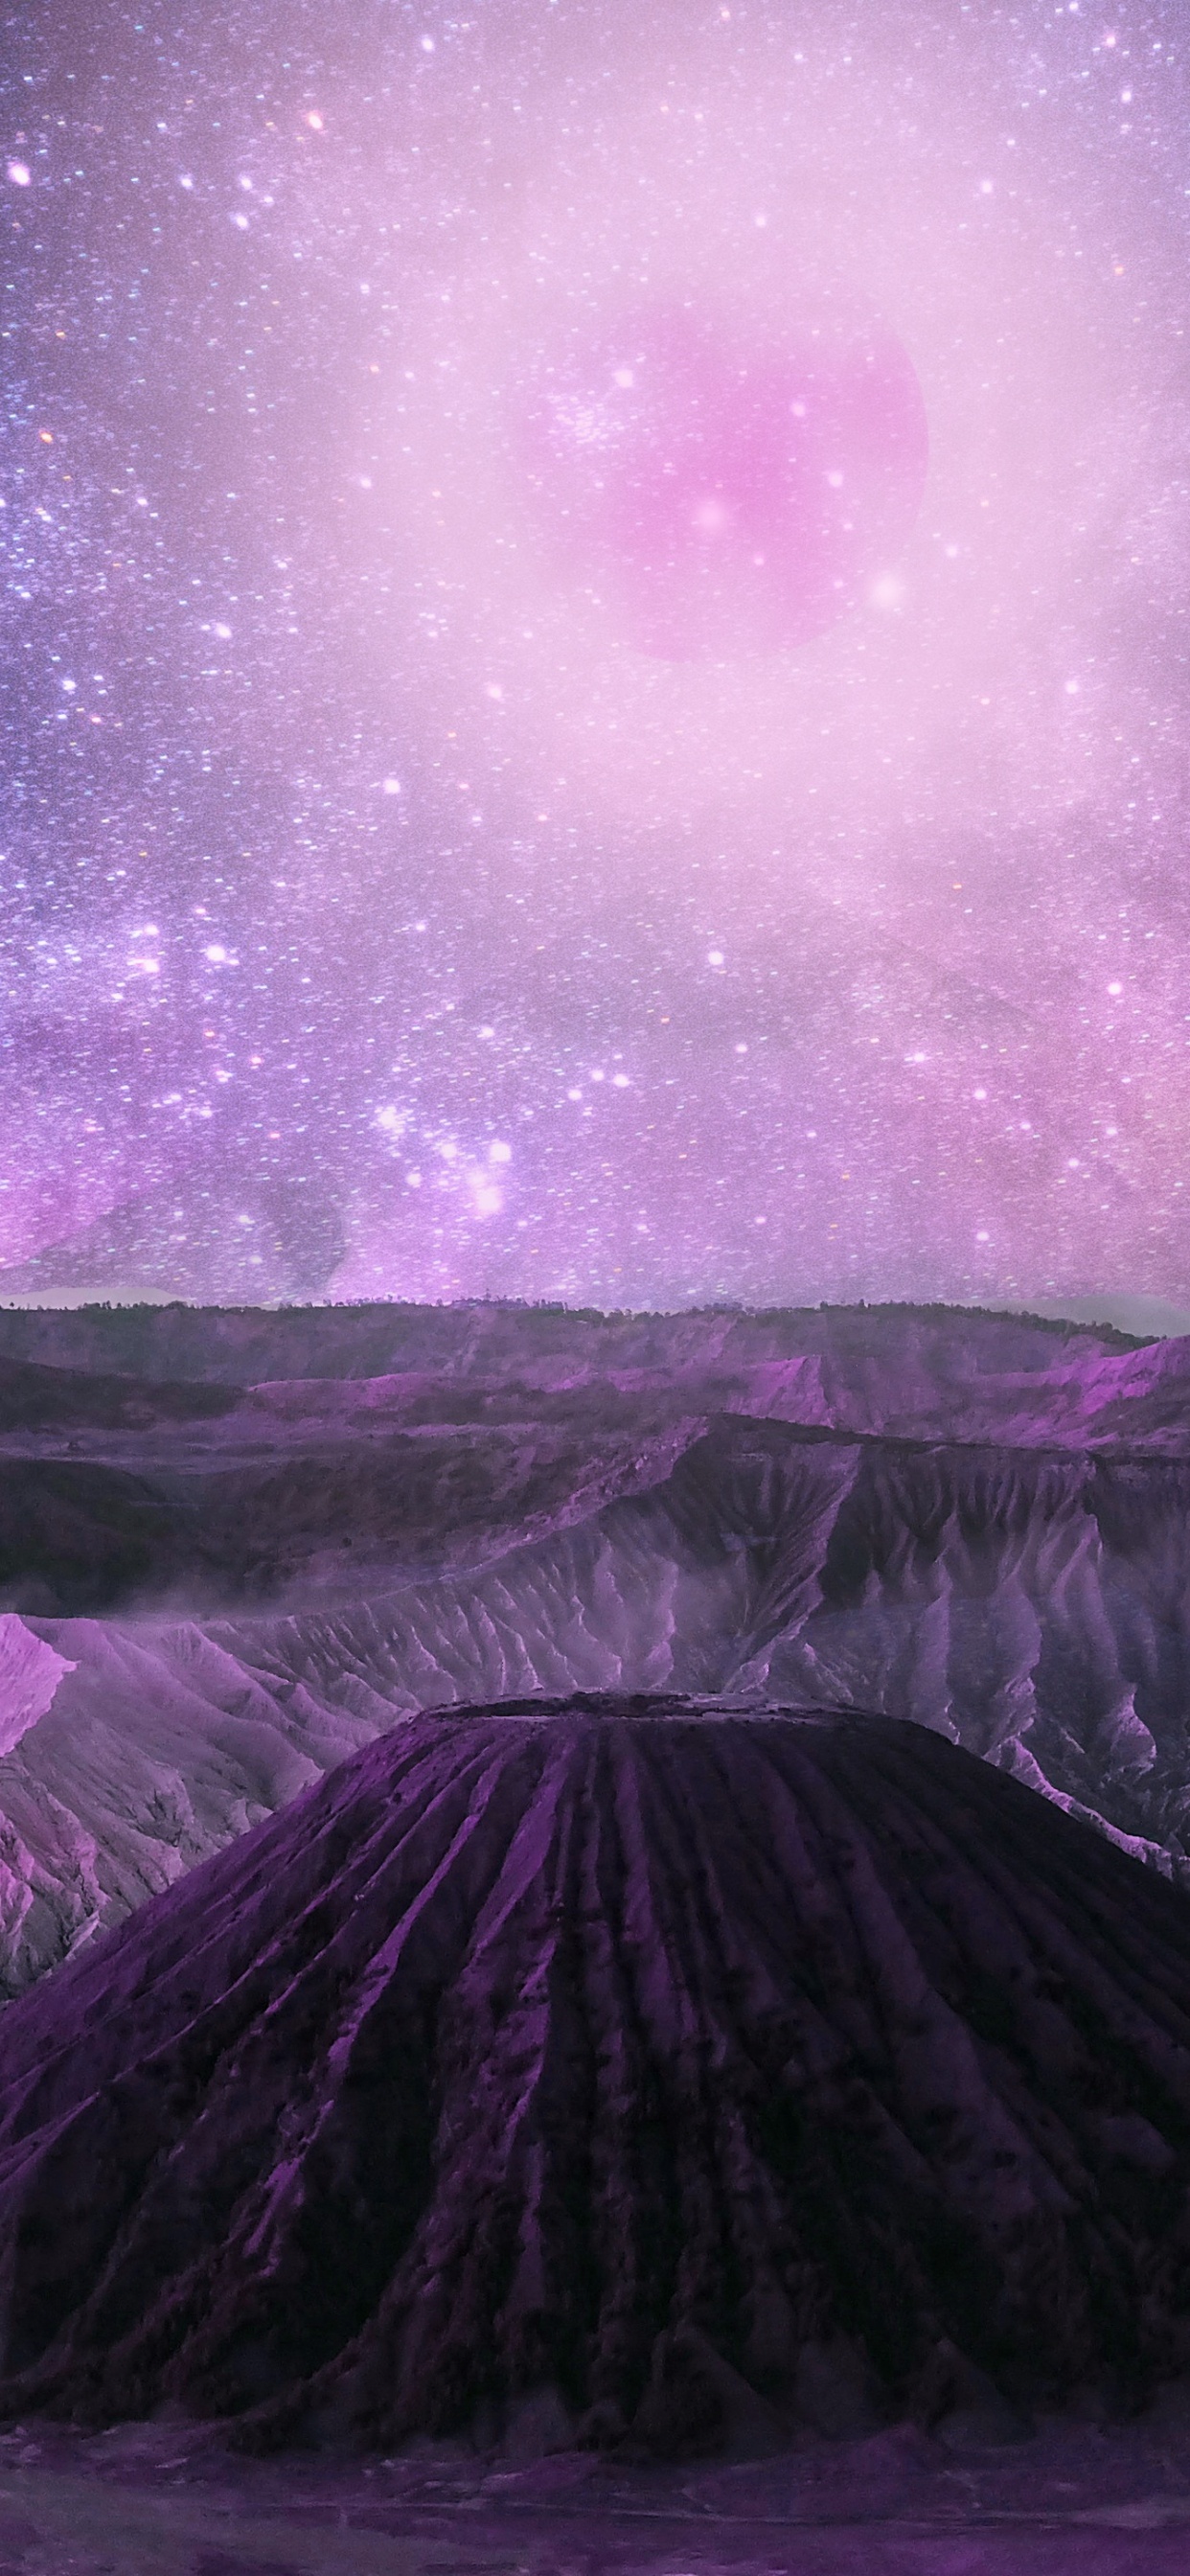 Purple and Black Sky With Stars. Wallpaper in 1242x2688 Resolution